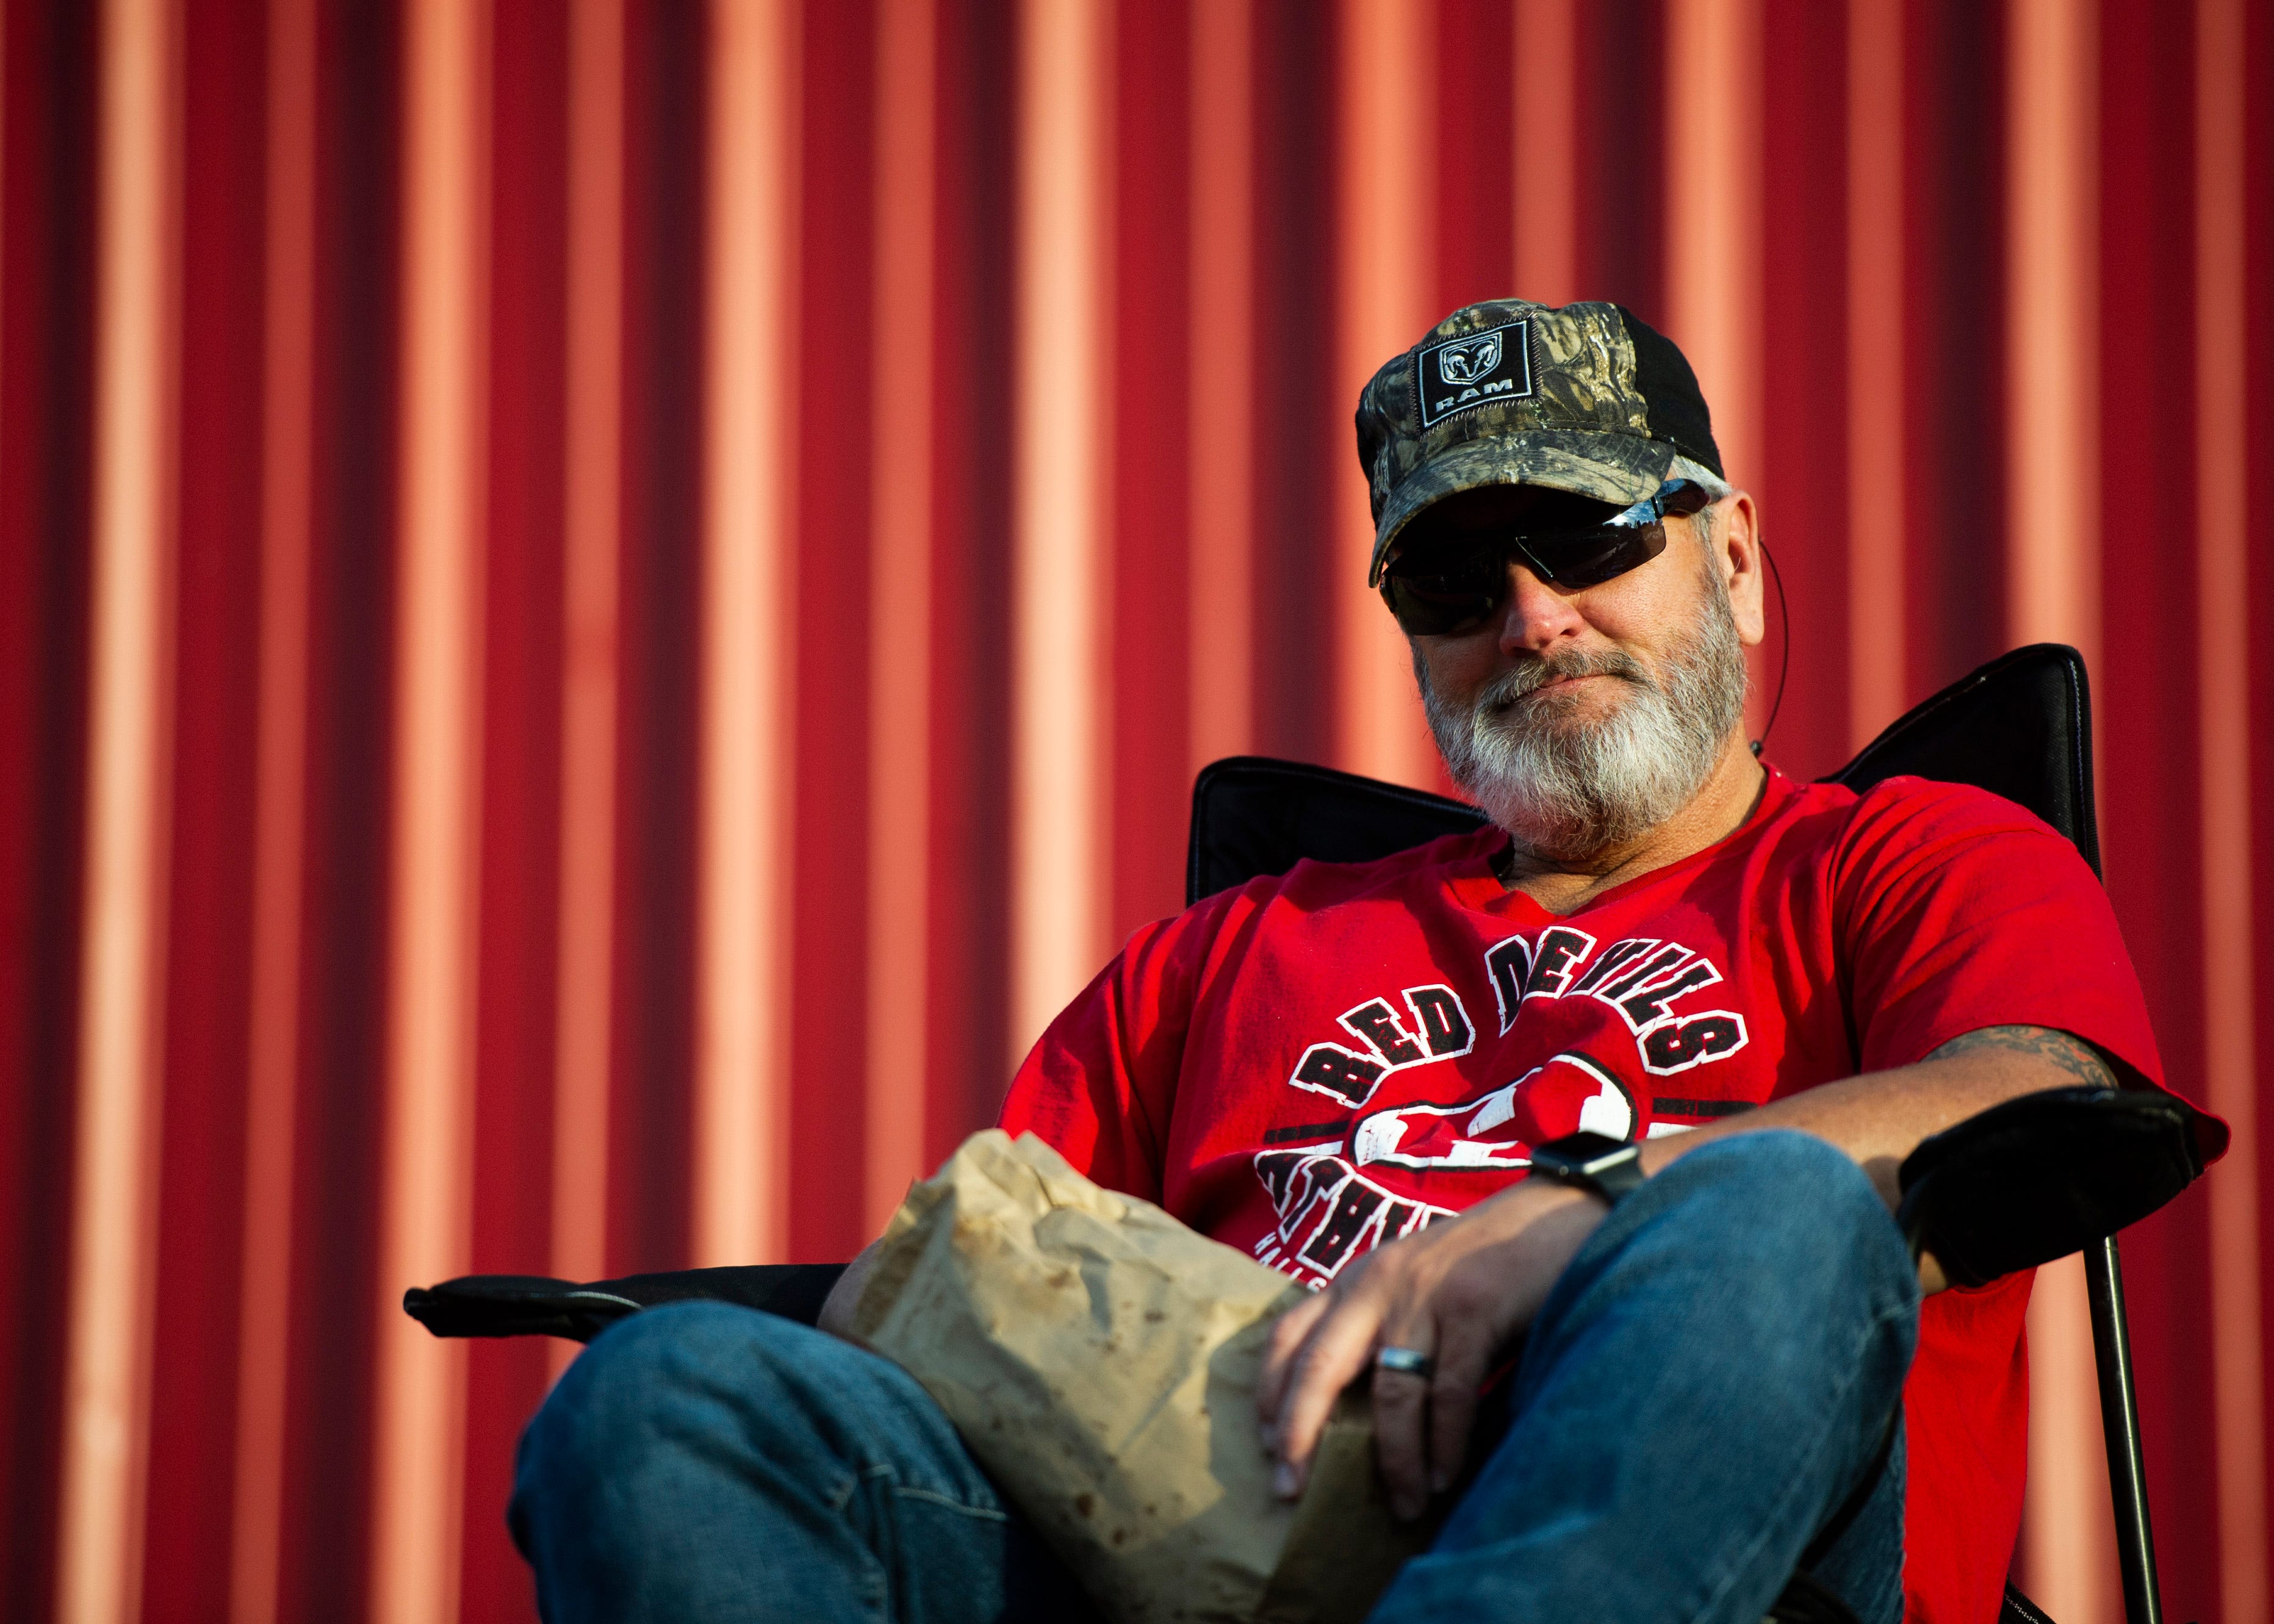 Halls fan, Steve Wise, watches the field before the Halls and Central high school football game on Friday, October 4, 2019 at Halls High School.